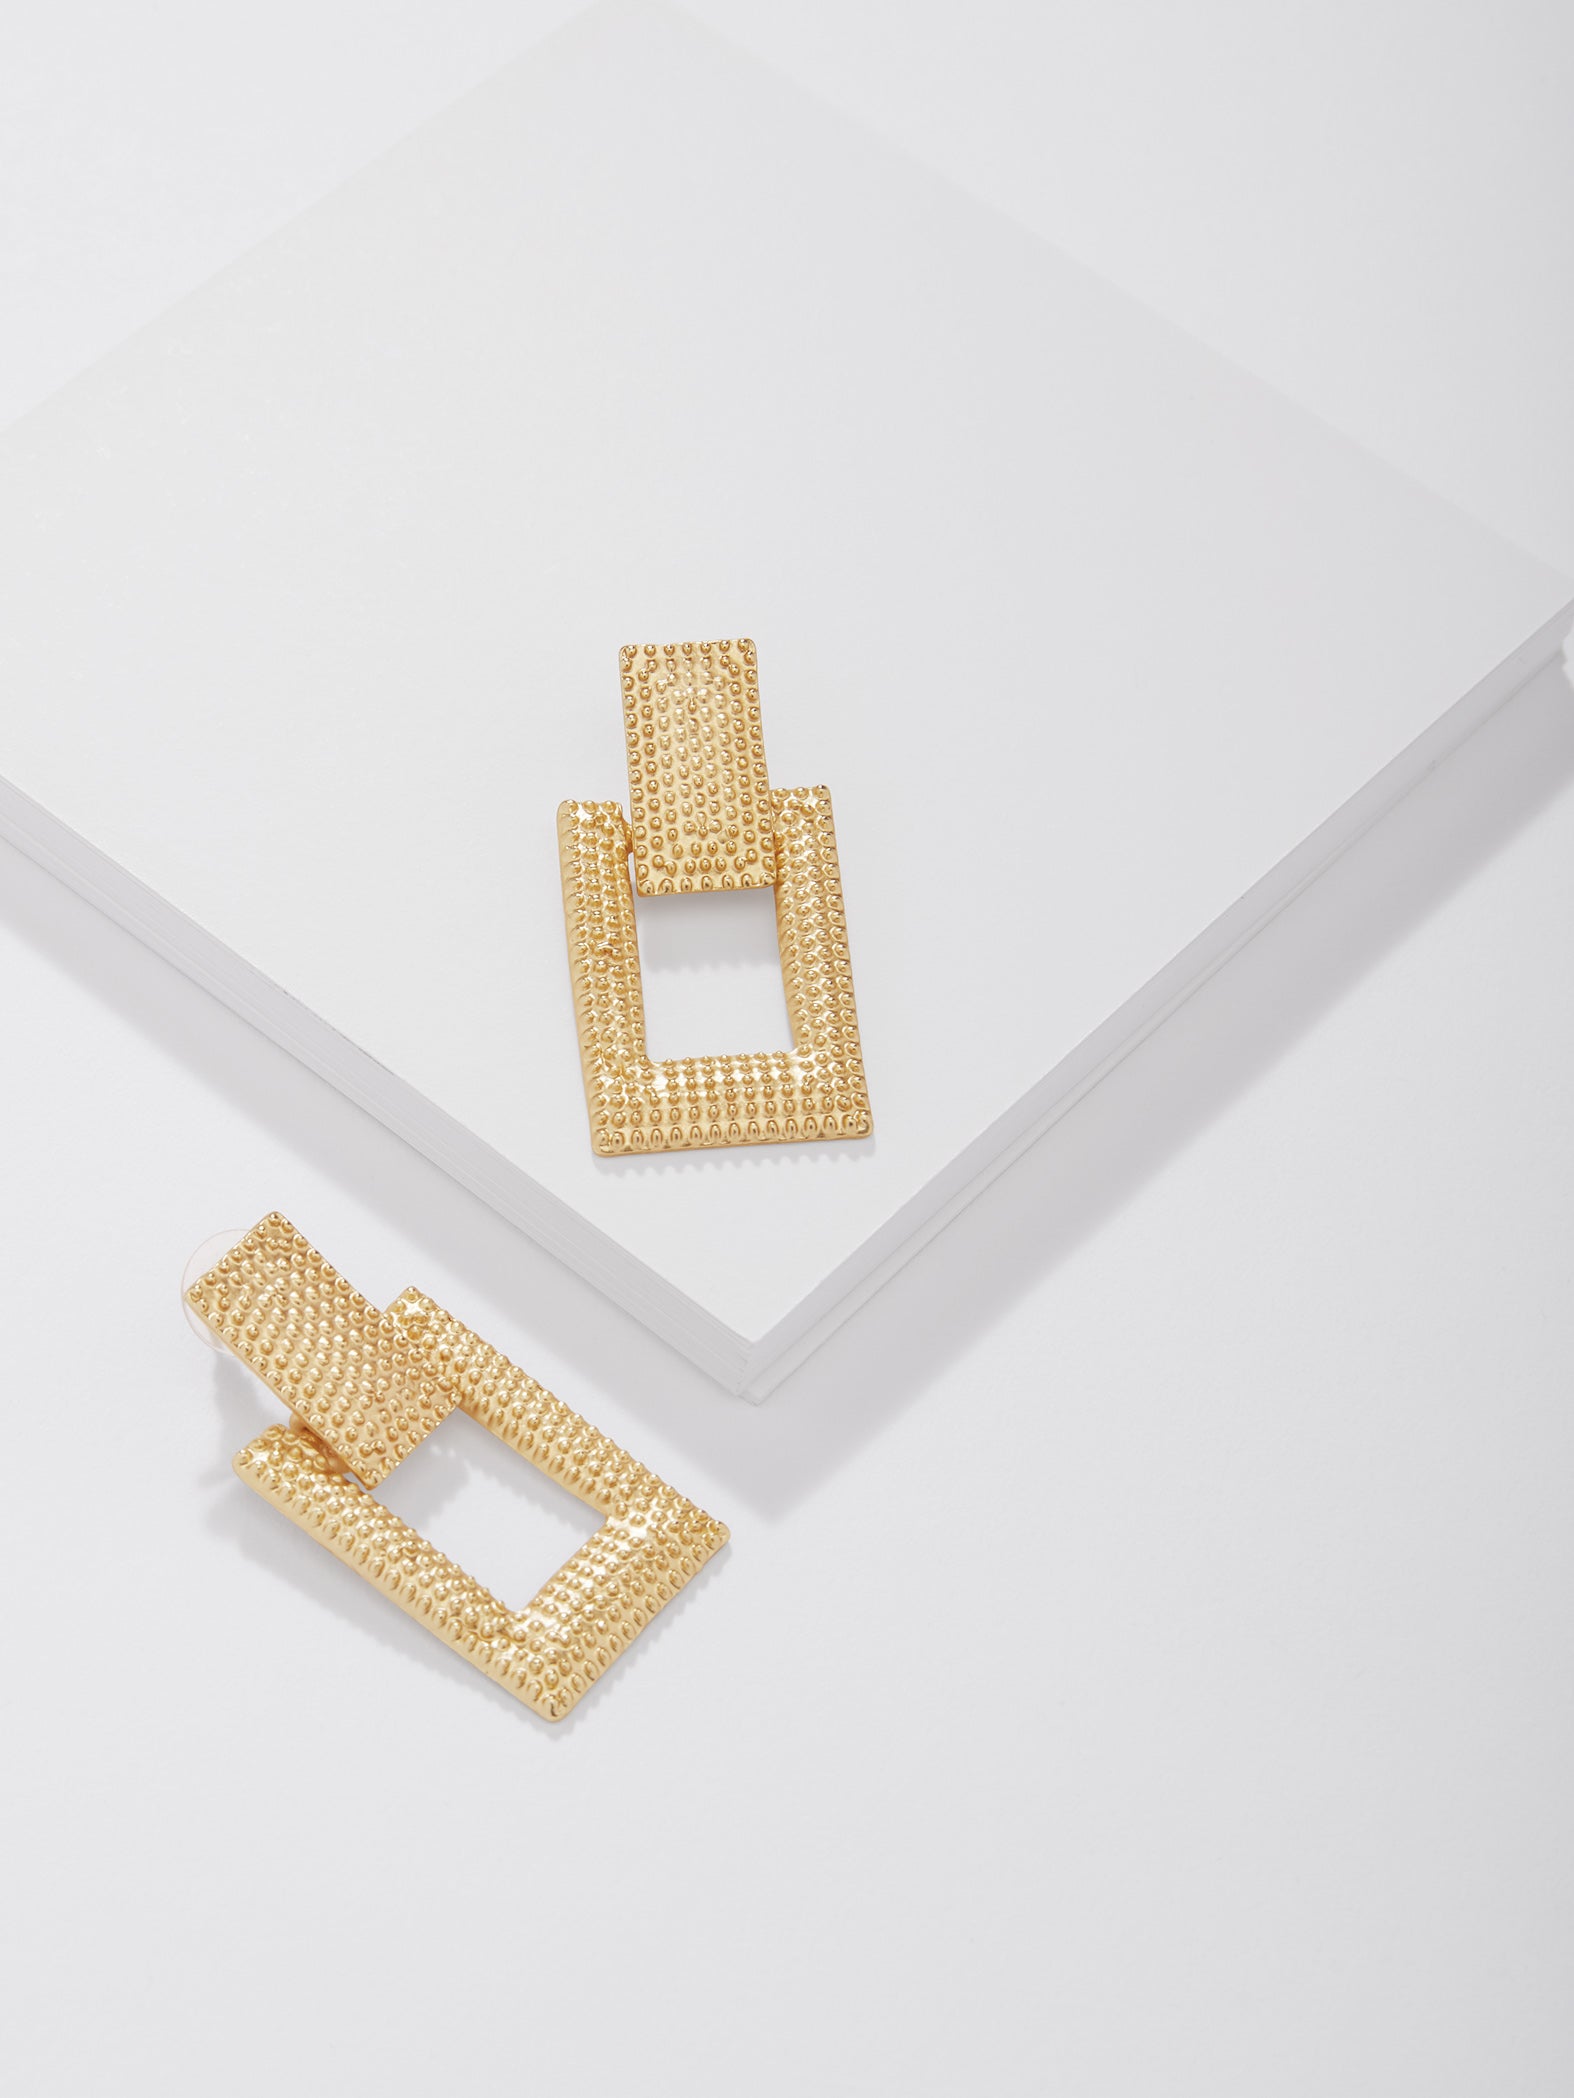 Gold Textured Rectangle Earrings